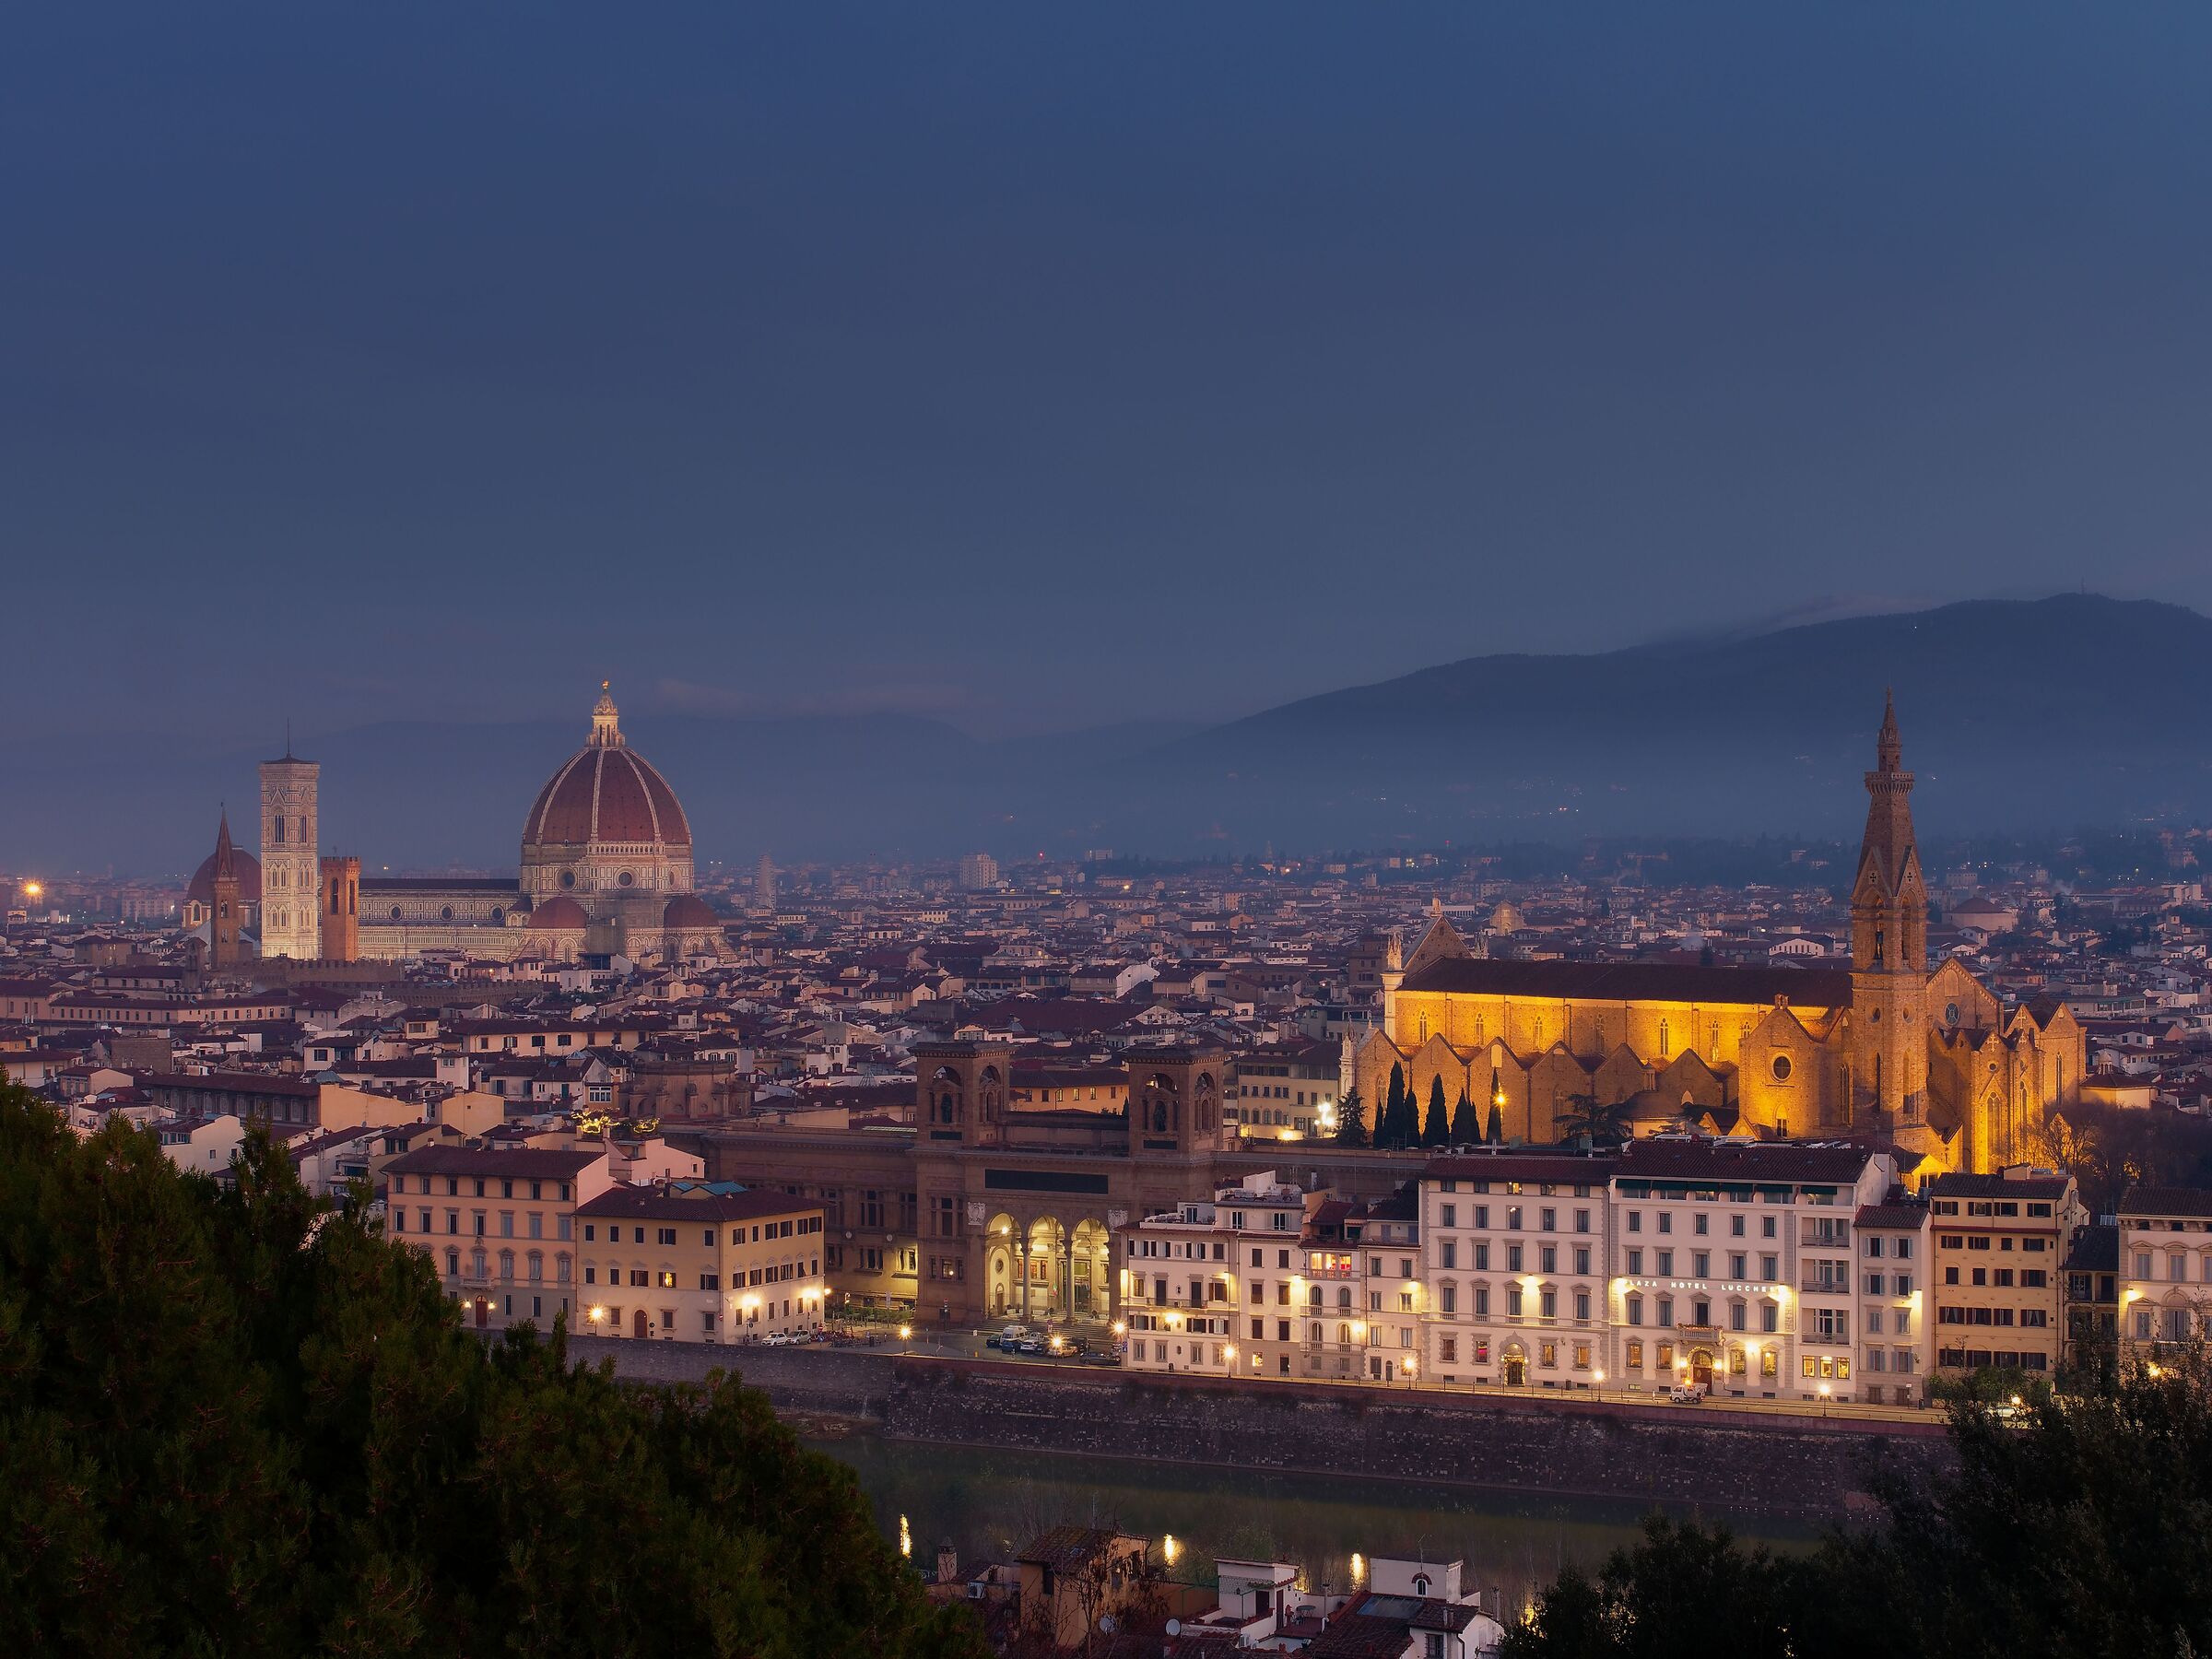 First glimpses of the splendor of Florence...